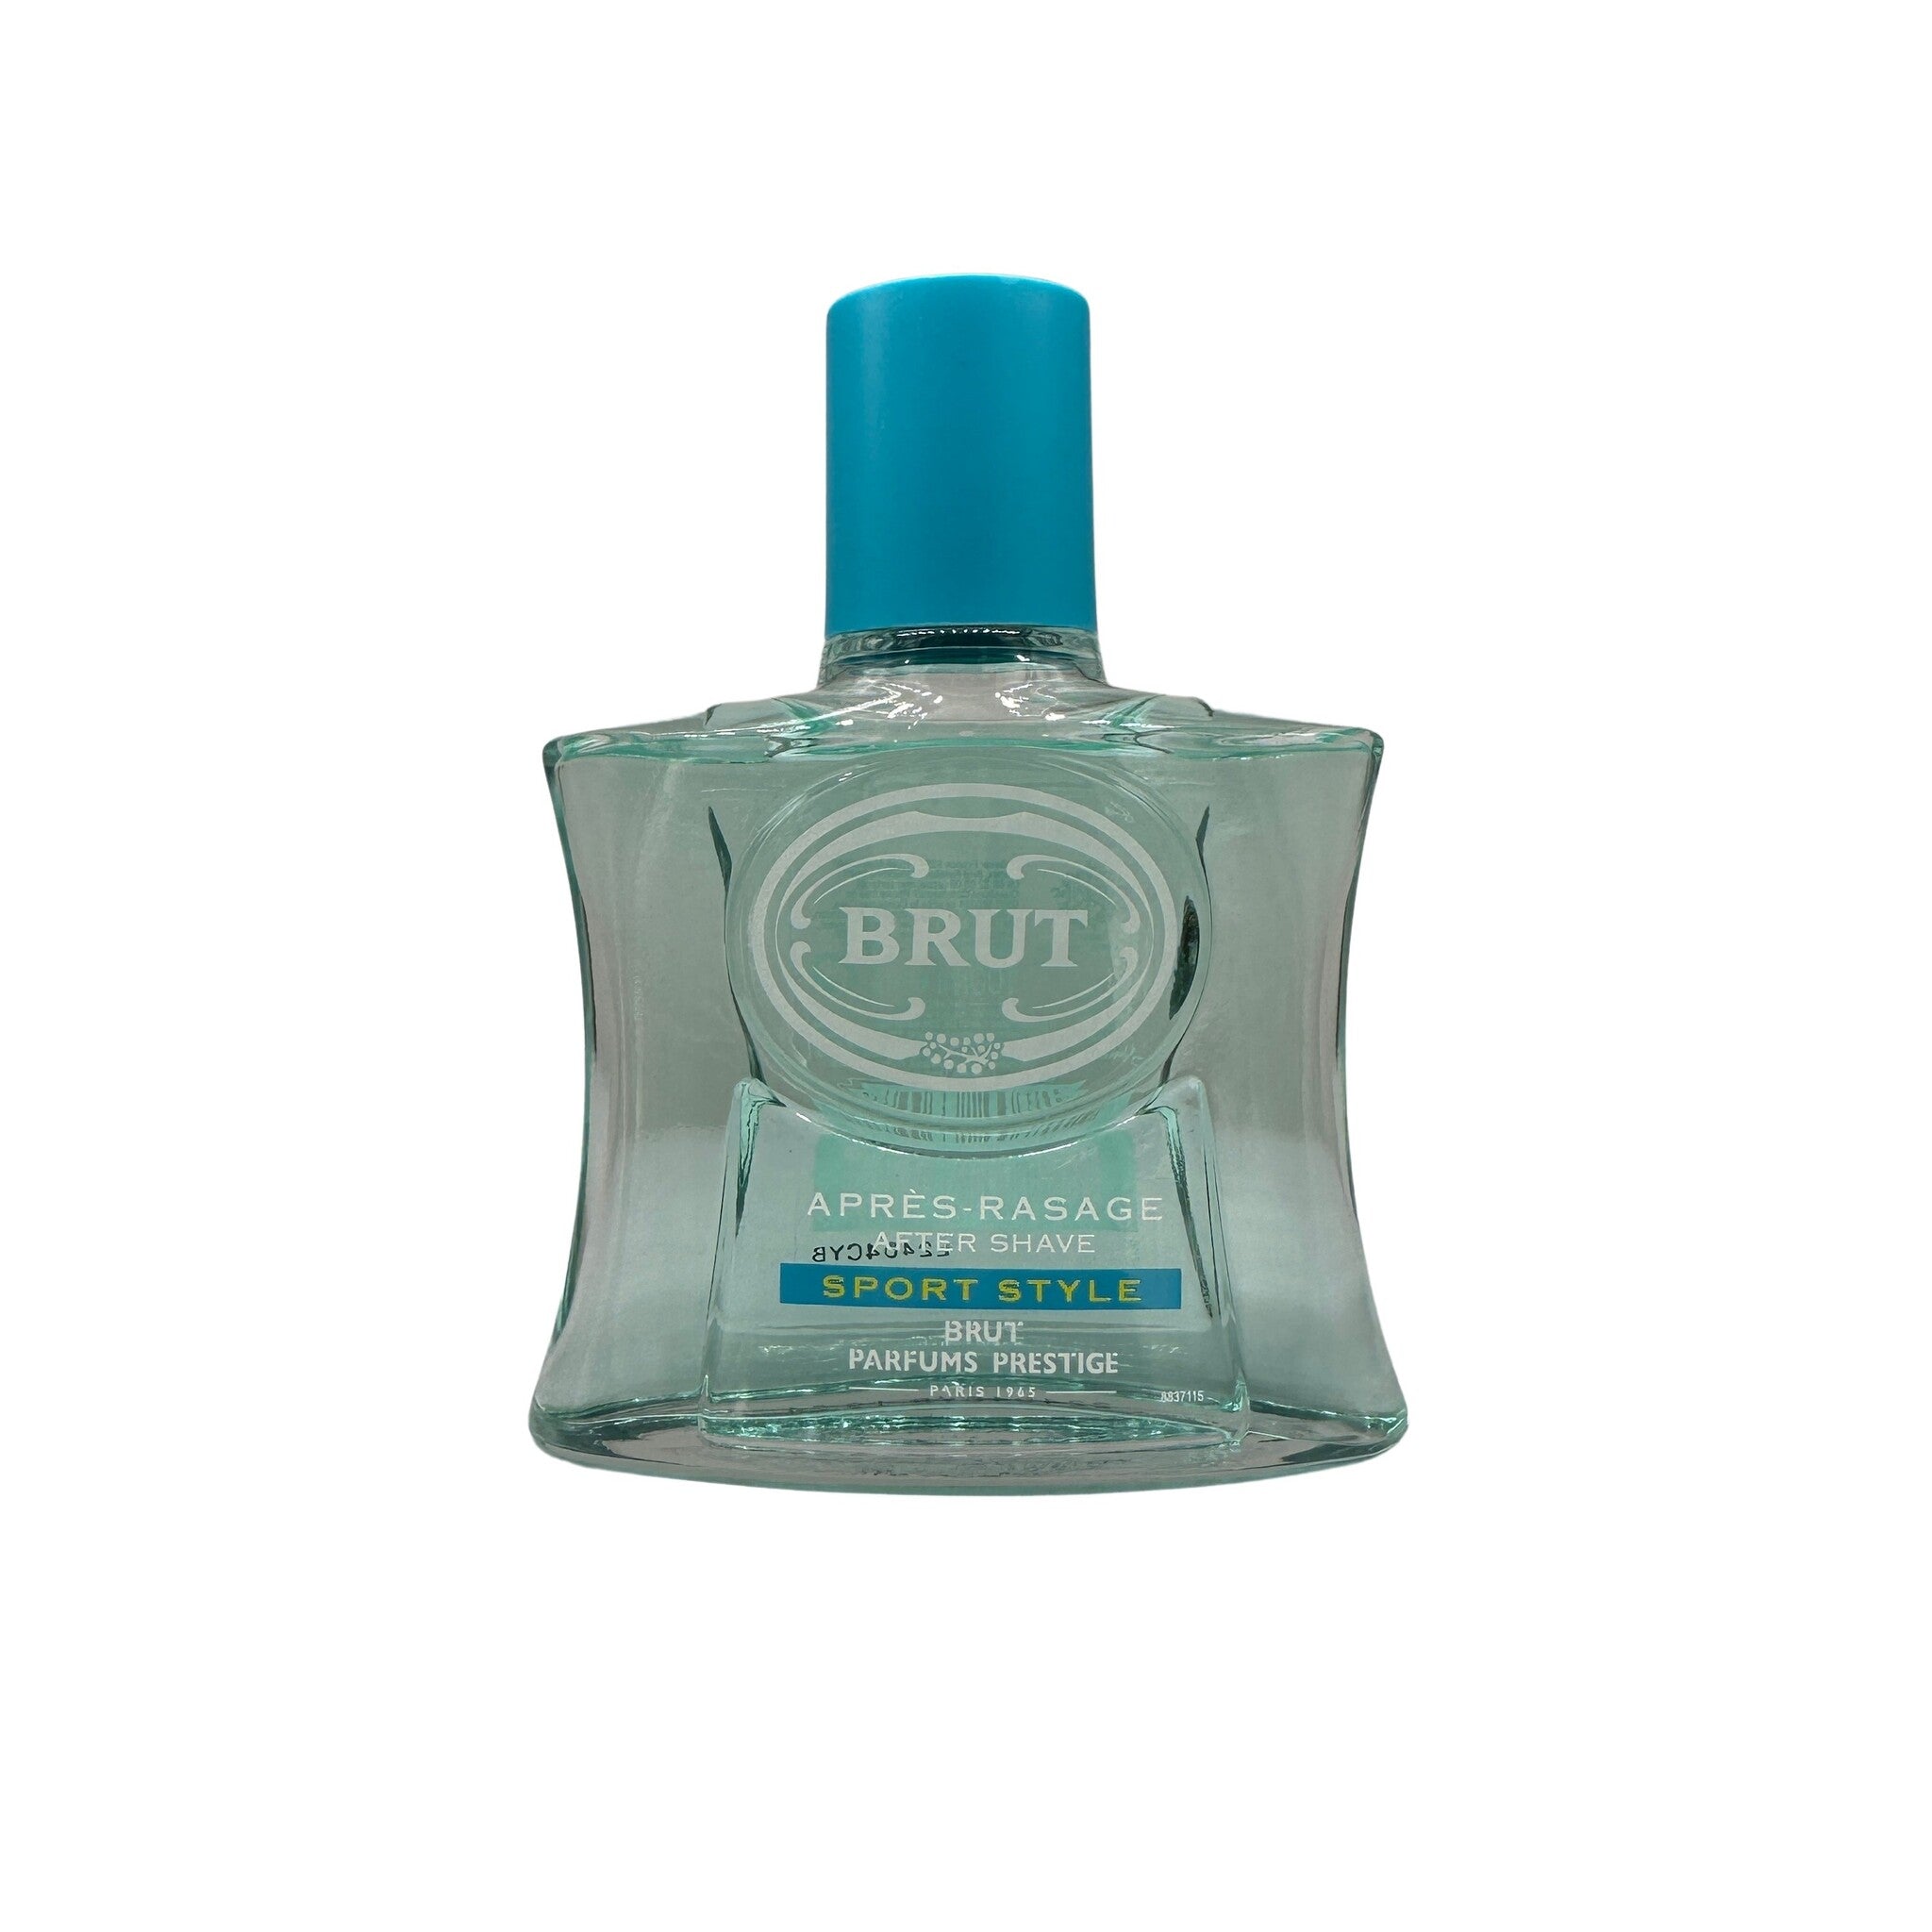 Brut aftershave Sport Style 100ml